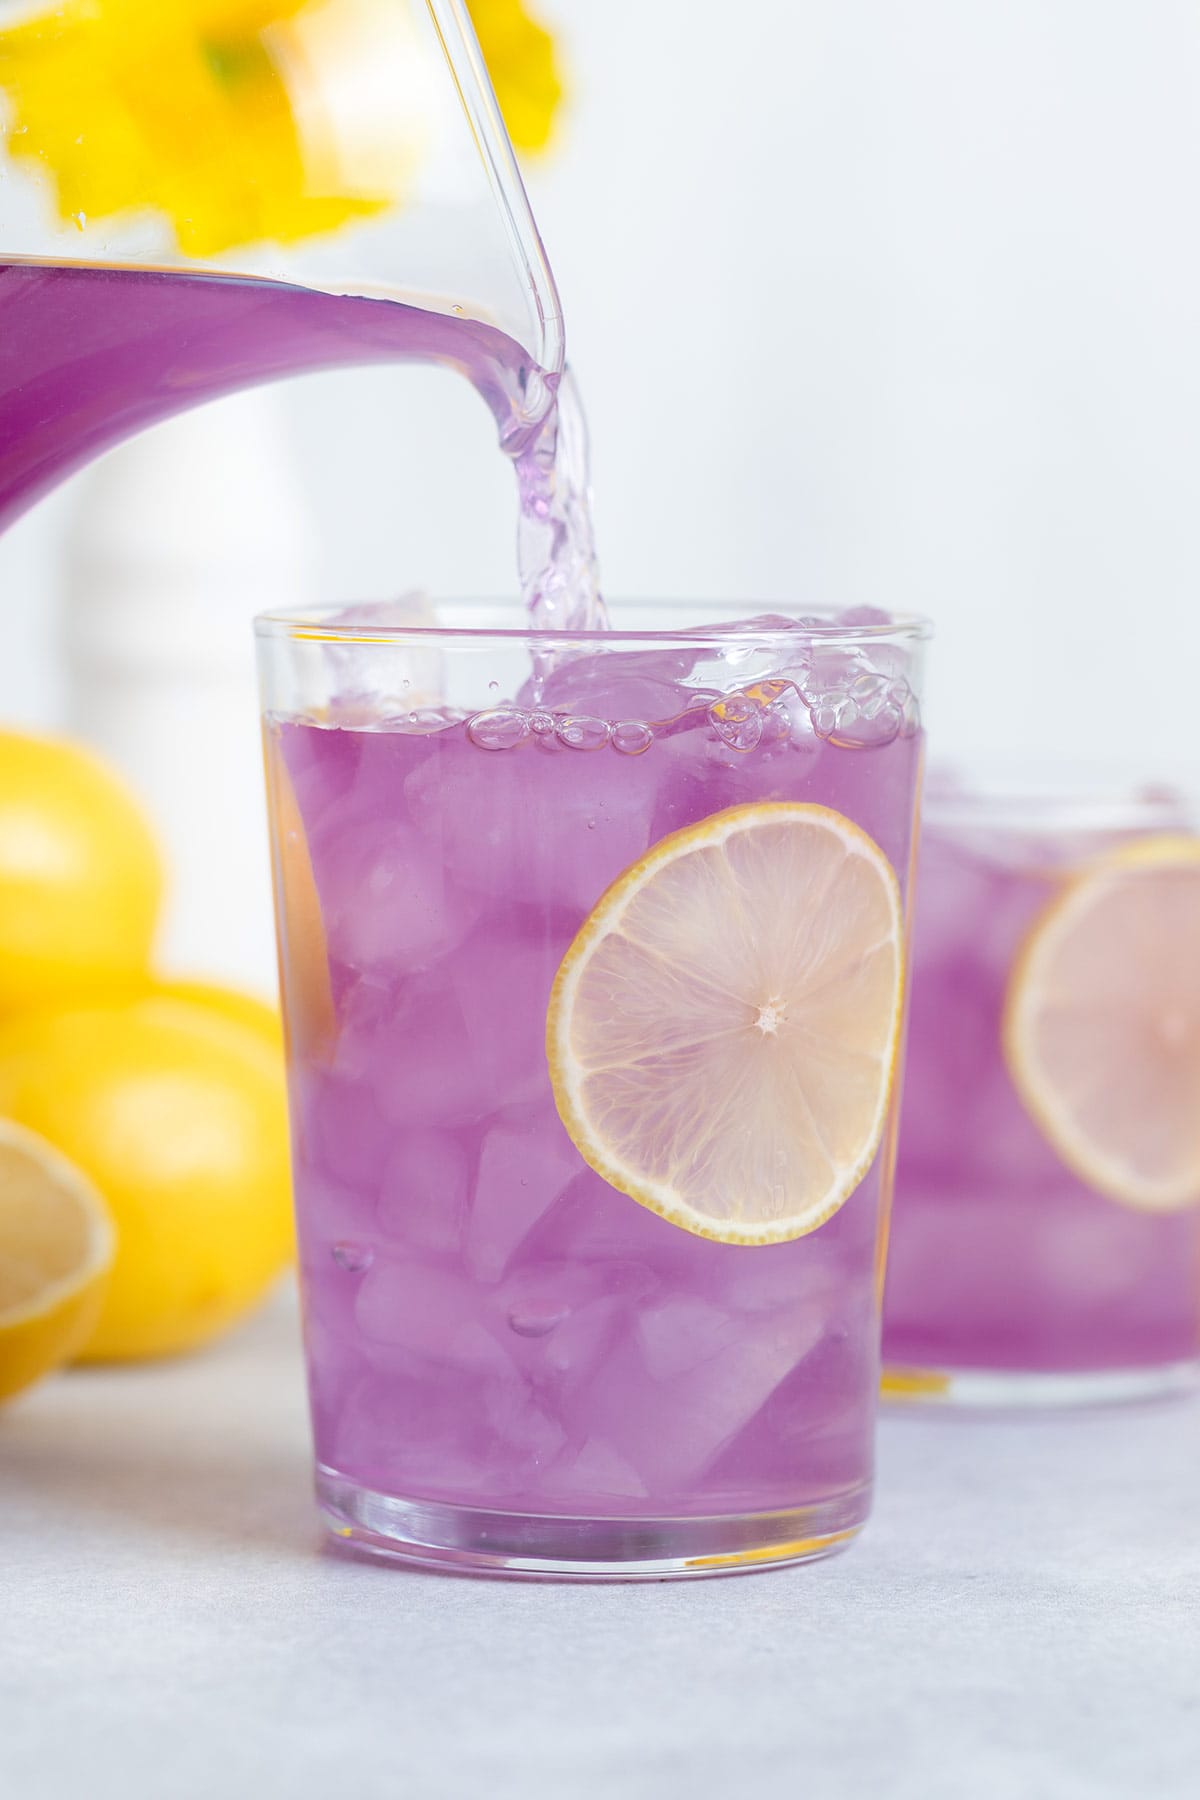 Purple lemonade being poured over ice into a tall glass garnished with lemon slices.